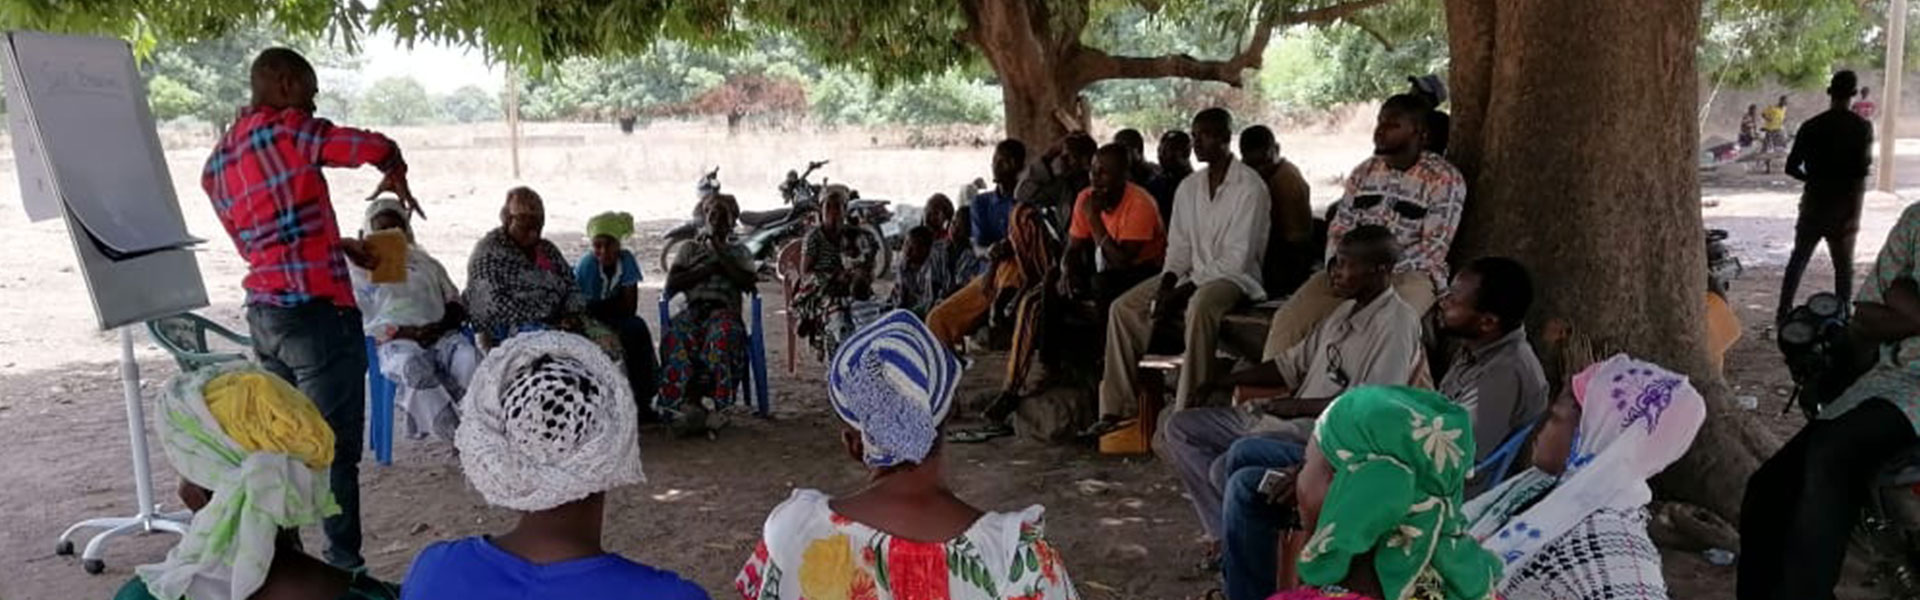 Smallholder farmers recieve training on conservation agriculture practices.the training centered on improving soil infertility and soil erosion prevention.